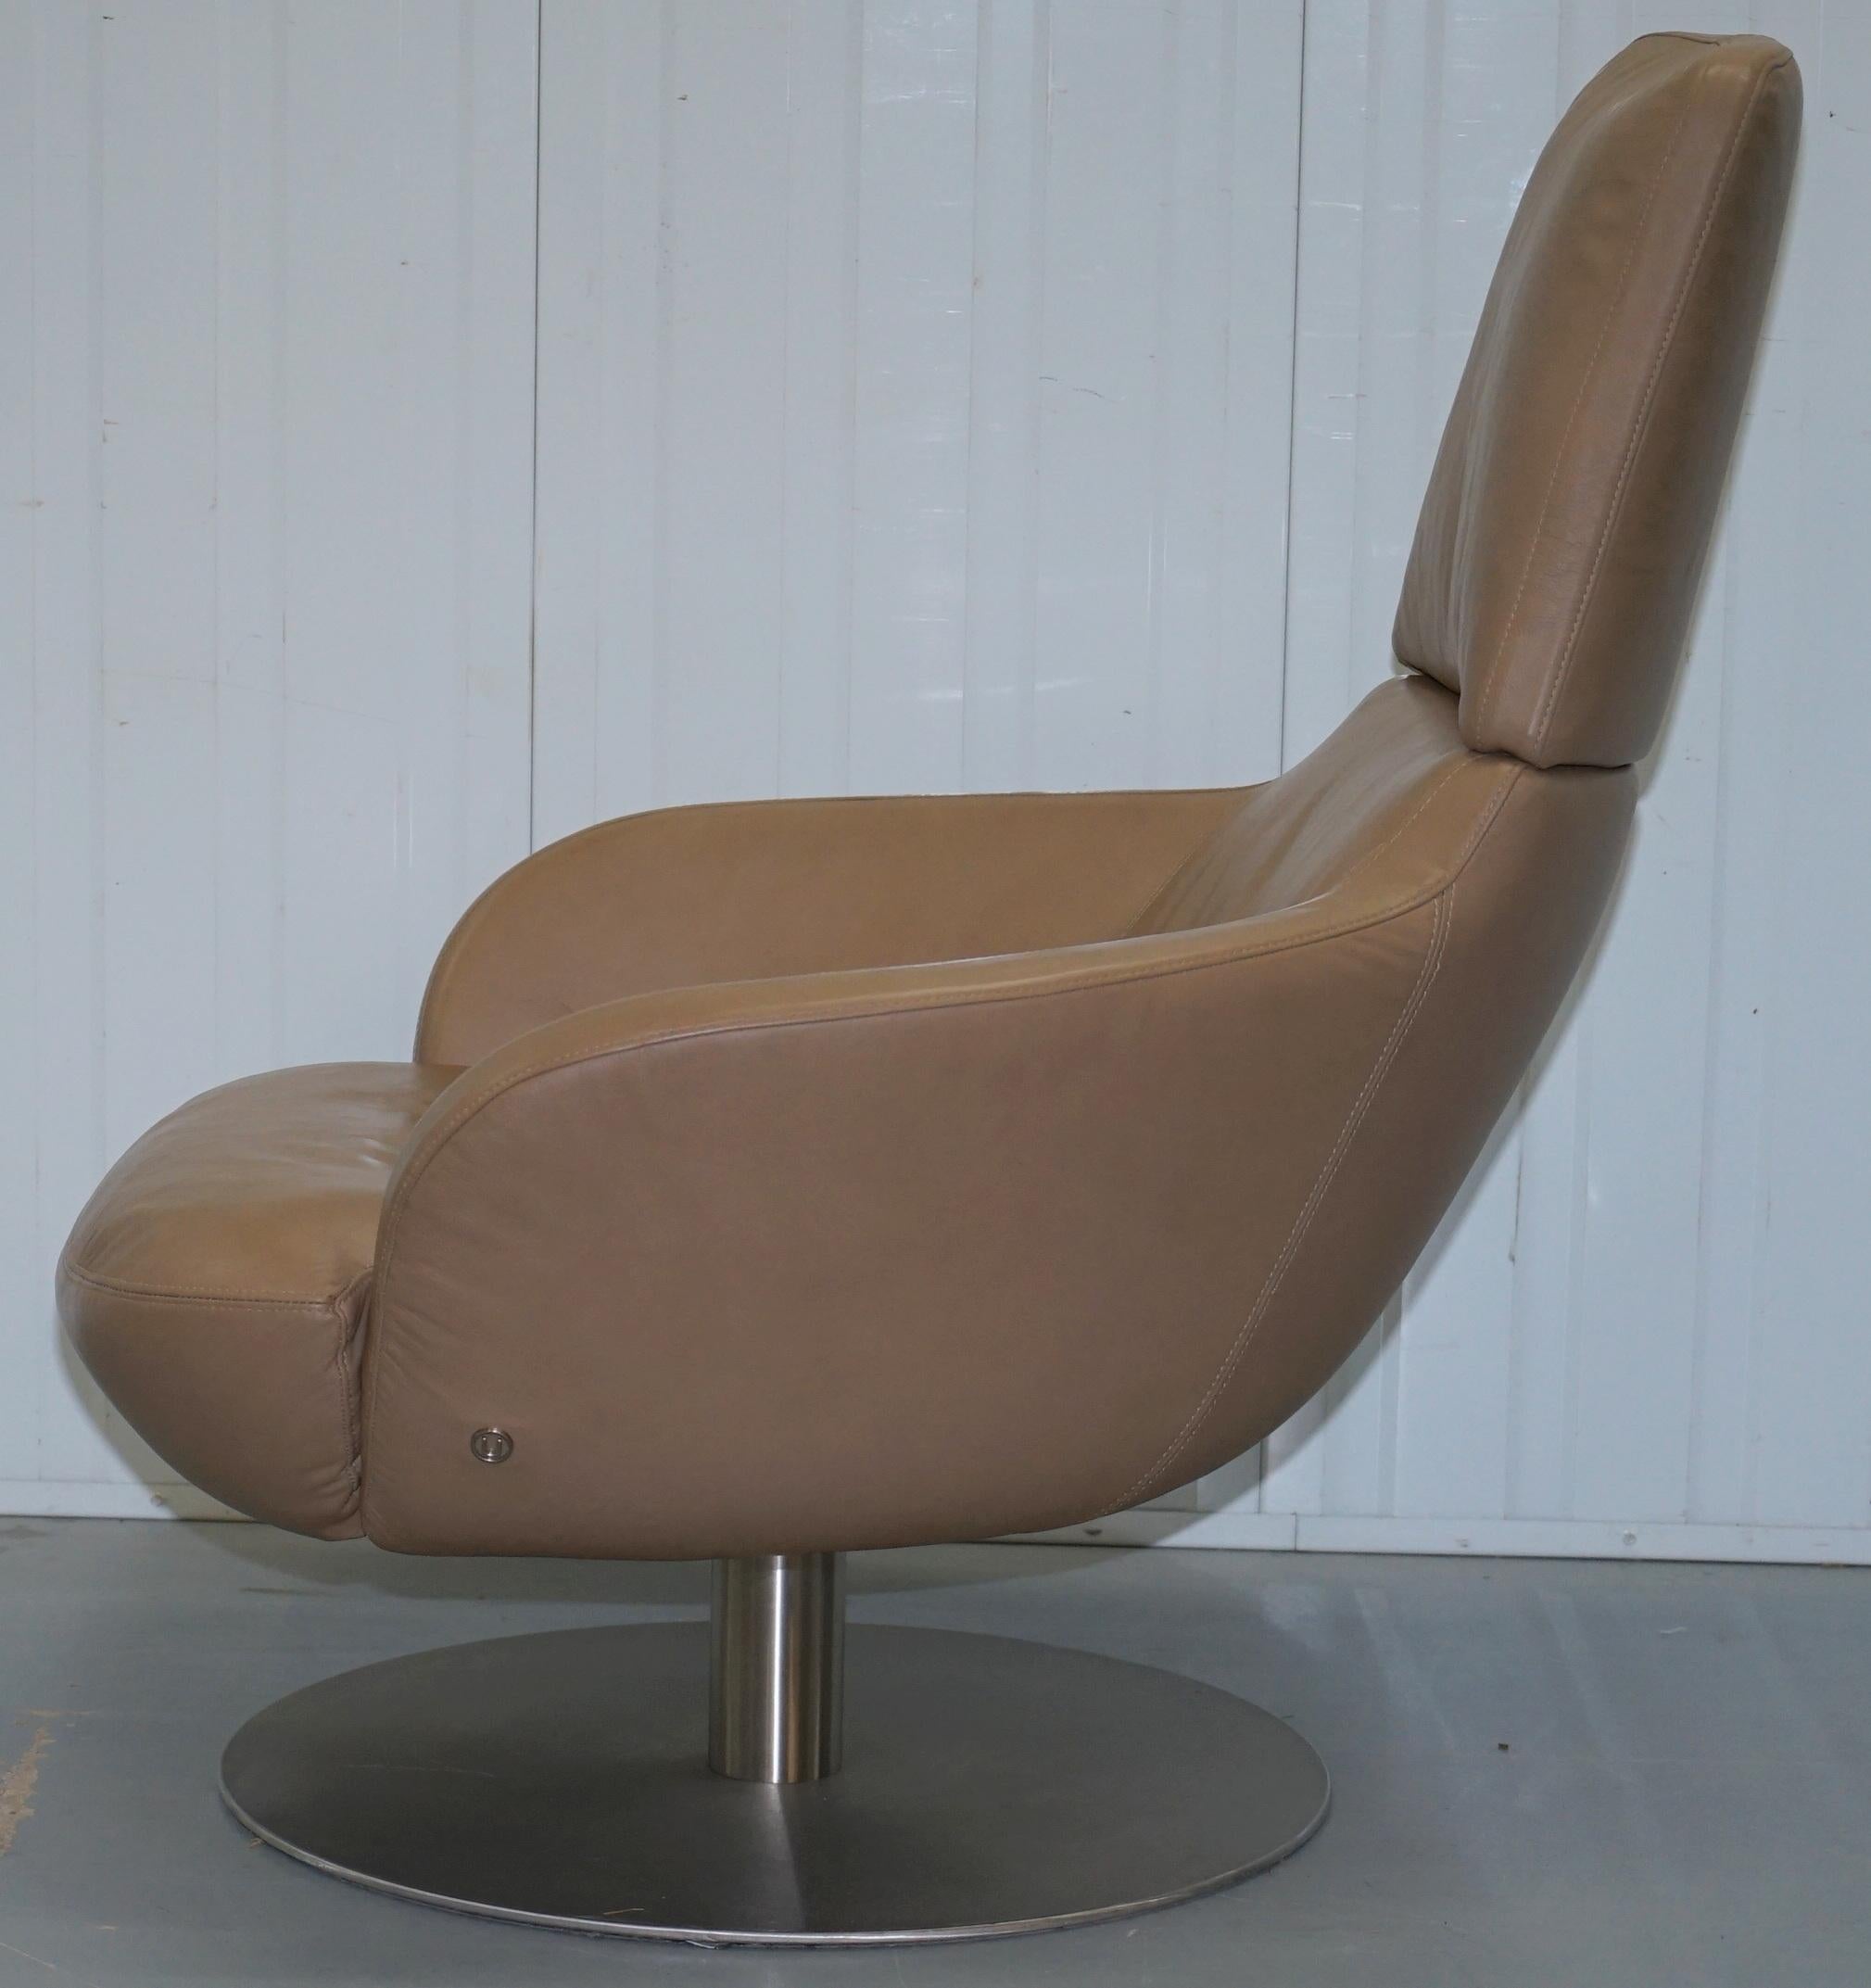 Rare Made in Italy Natuzzi Brend Swivel Armchair, Aged Brown Leather 2